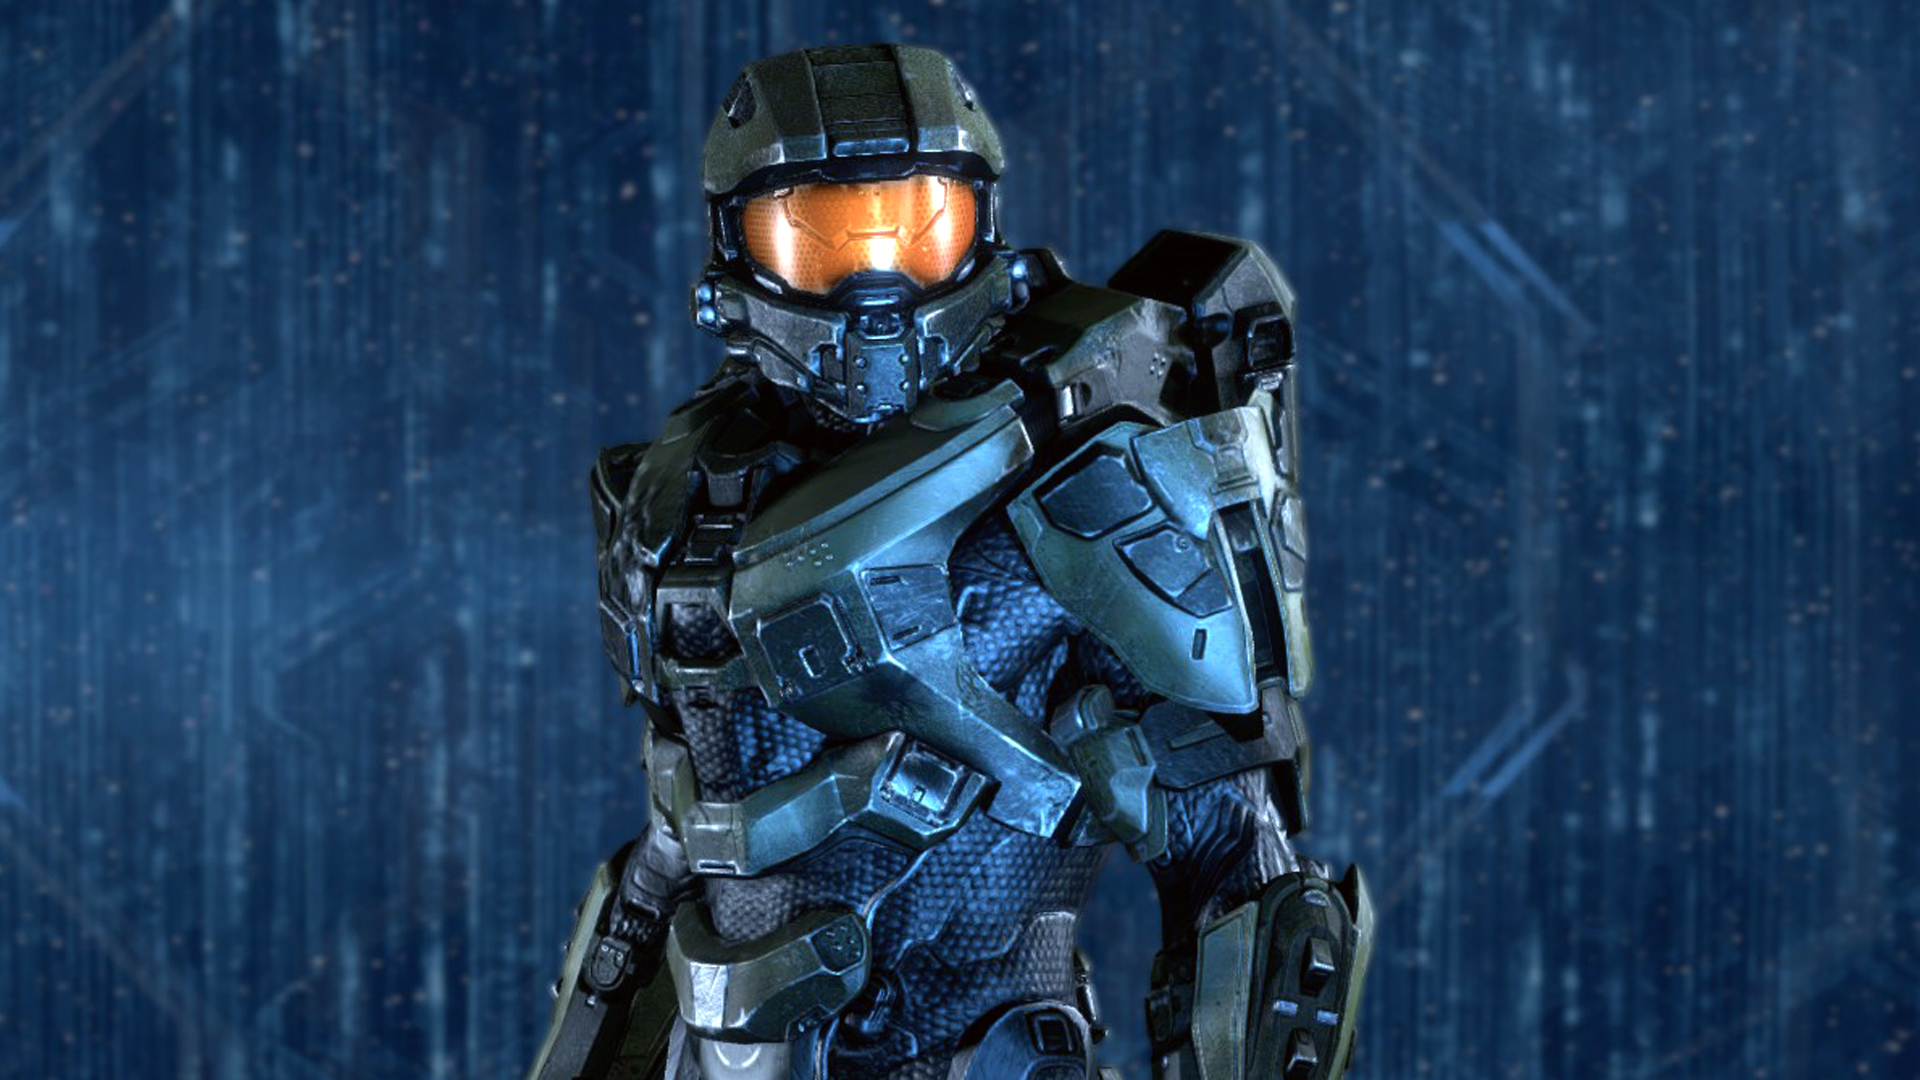 Halo MCC’s mod support is expanding next week